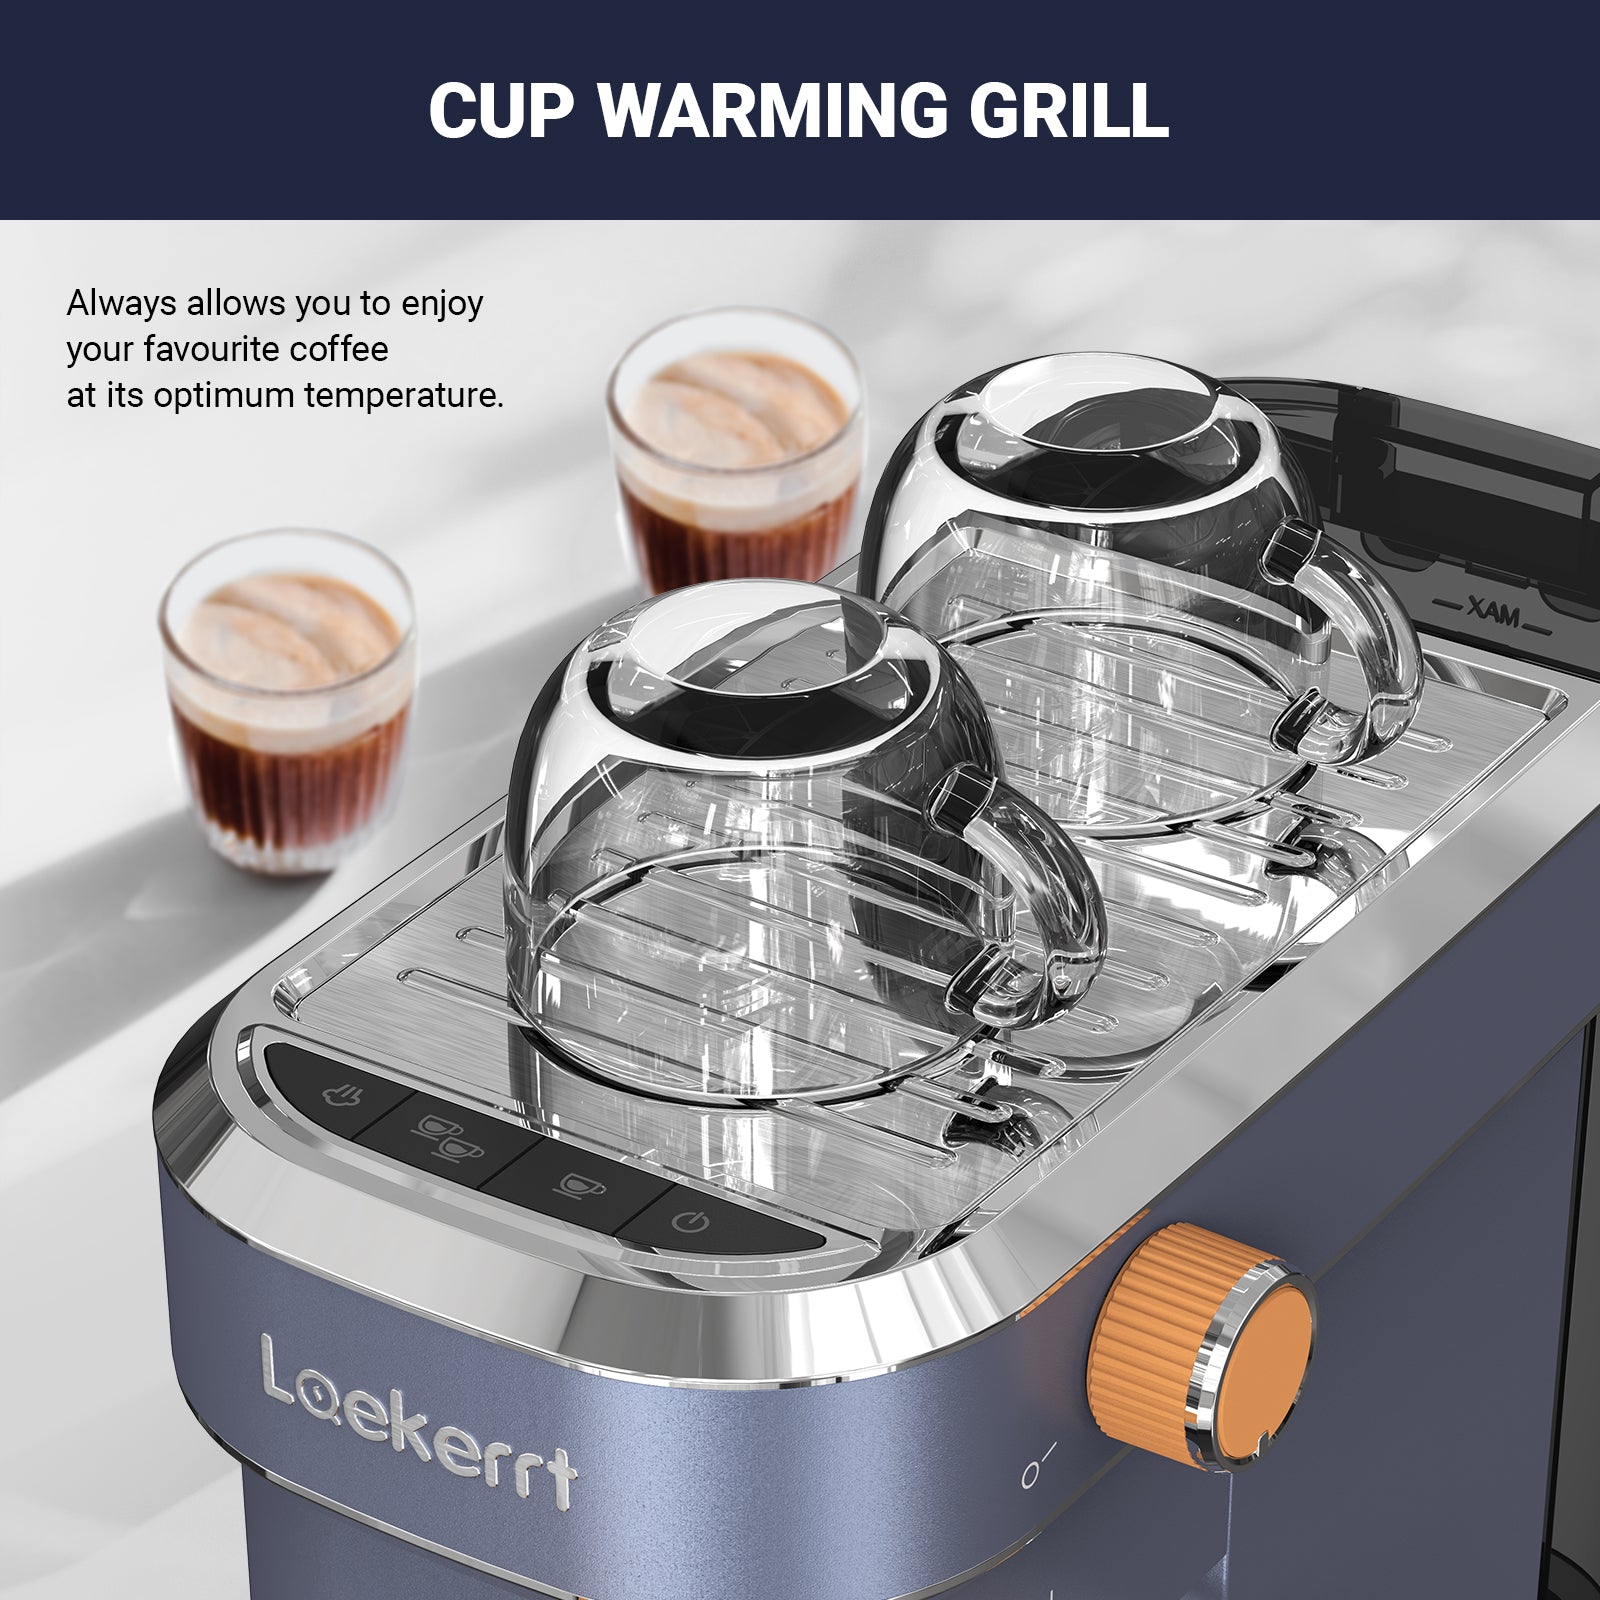 Laekerrt CMEP02 Espresso Machine, 20 Bar Coffee Maker with Commercial